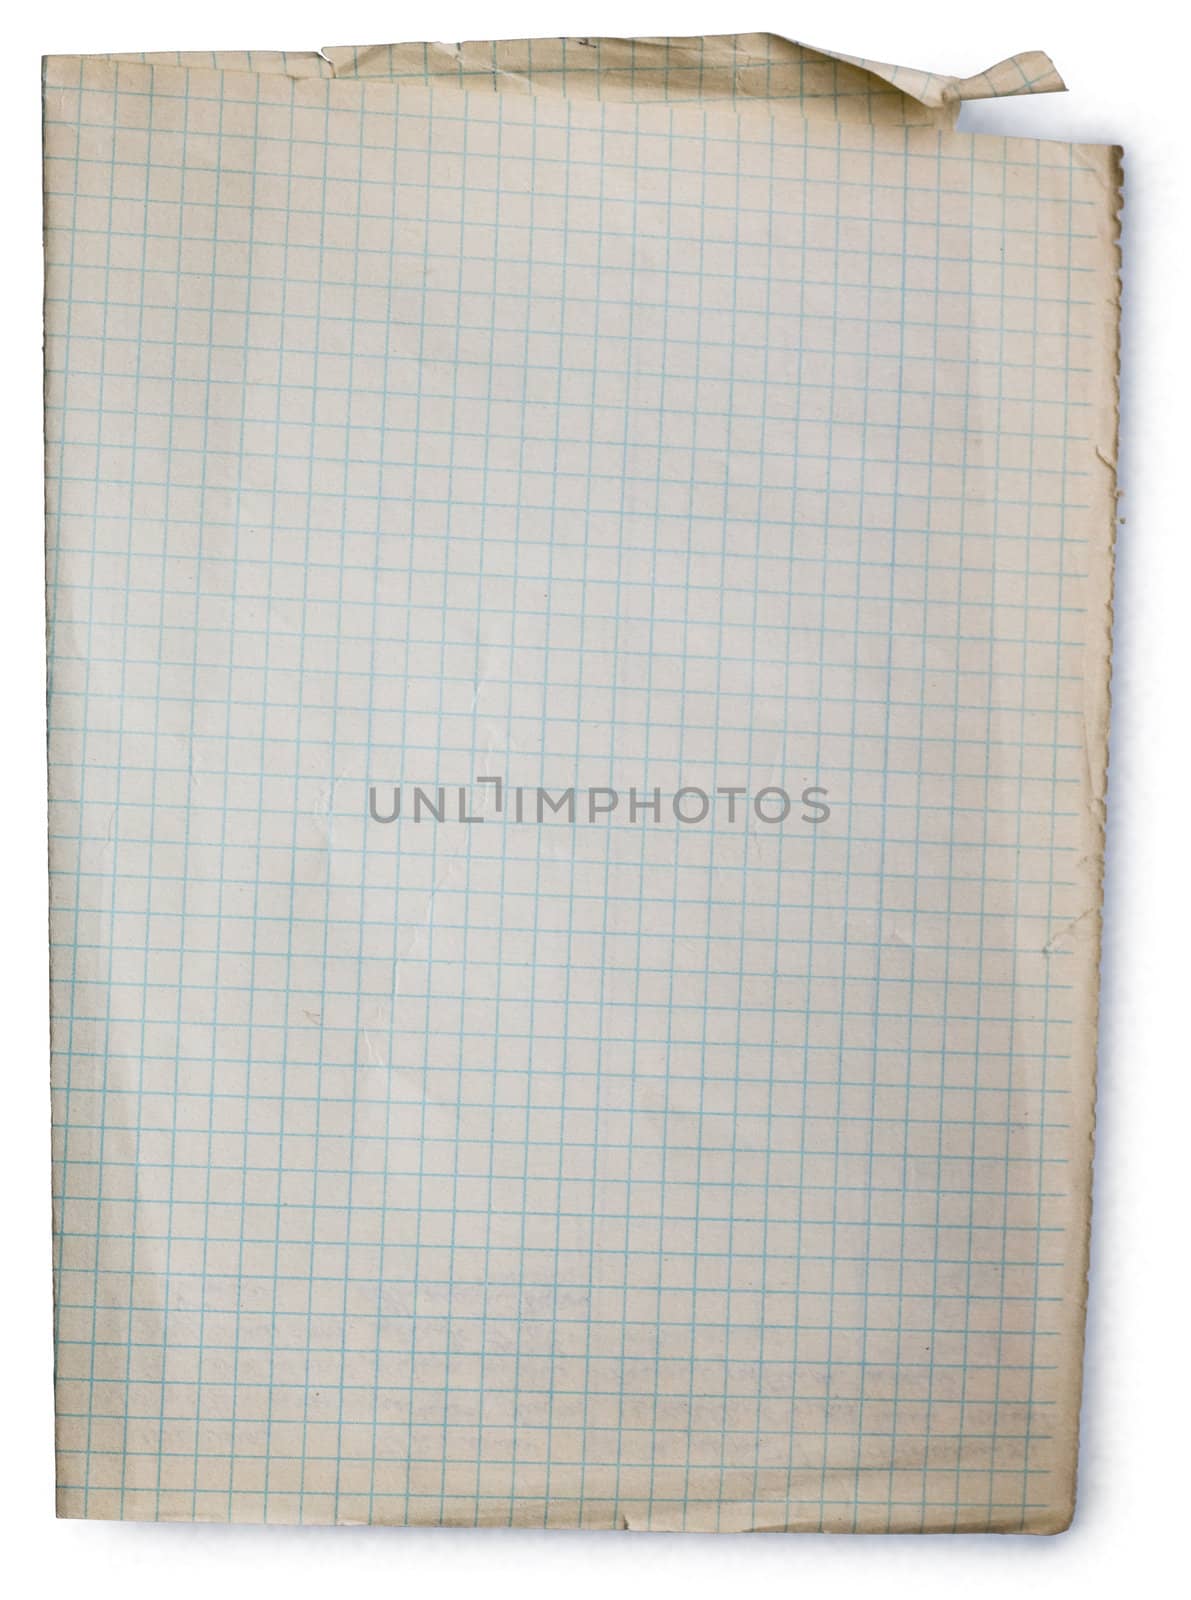 Old square lined paper from note book. Clipping path included to easy remove object shadow or replace background.